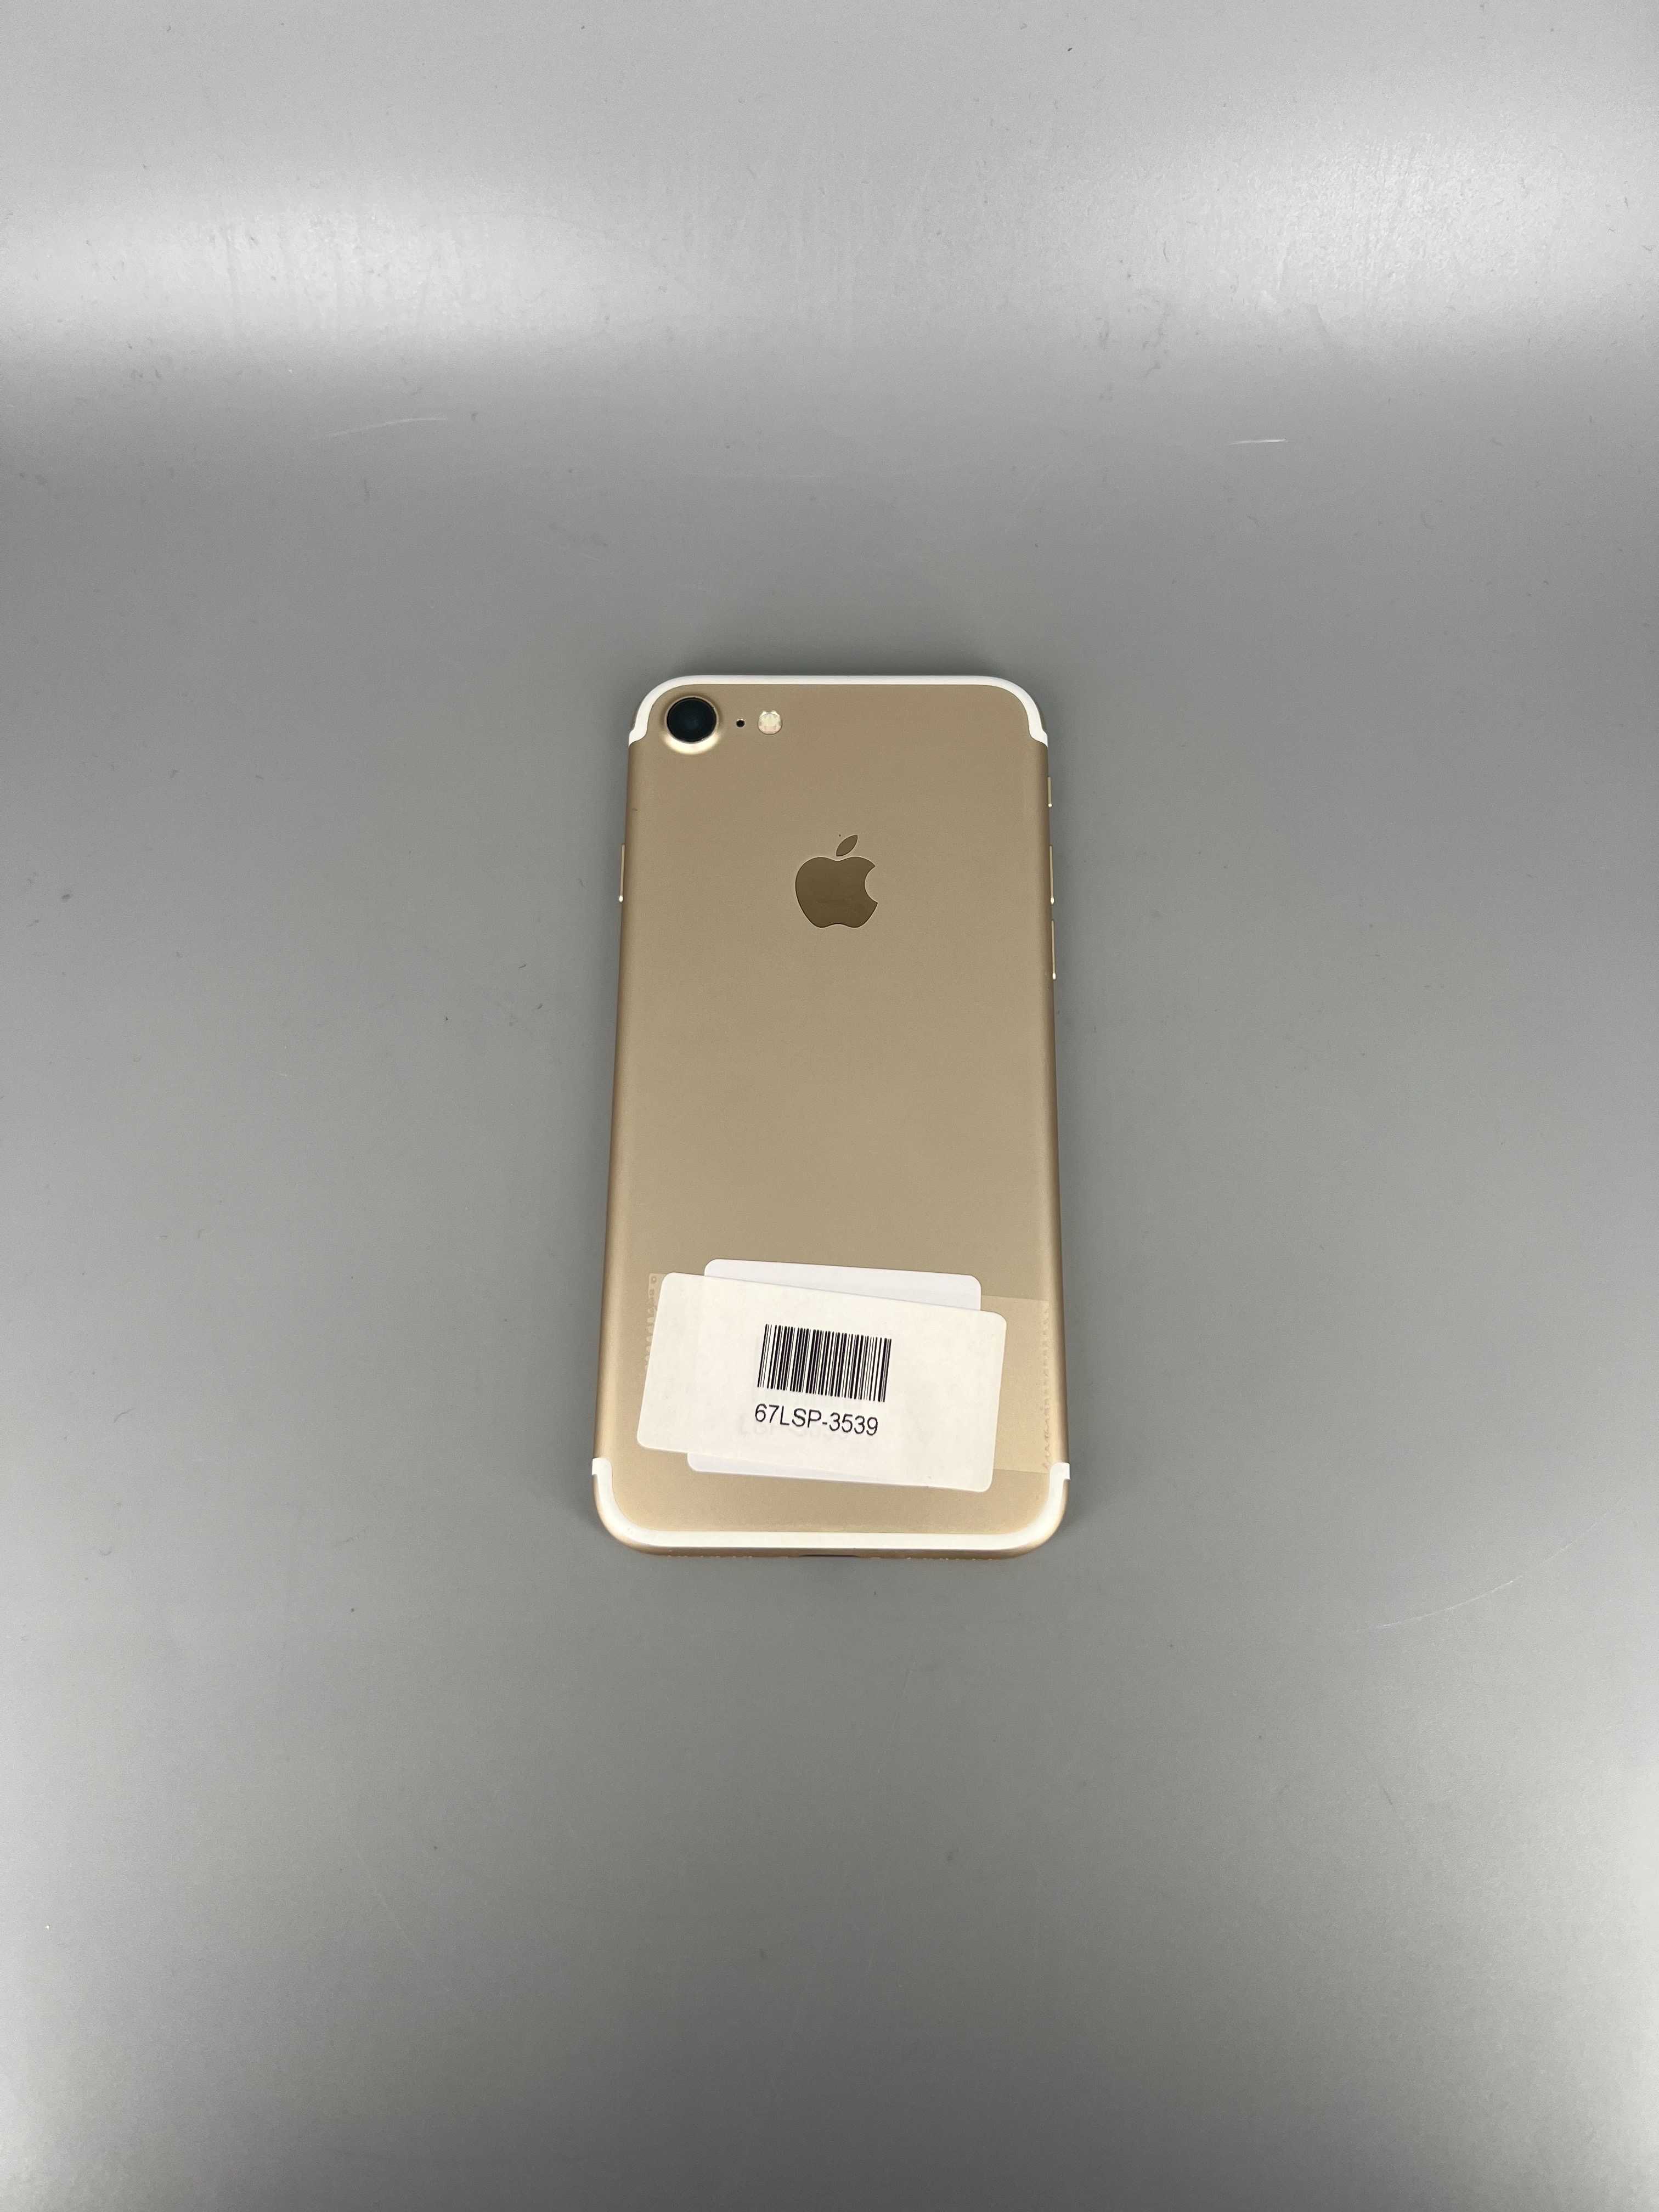 Used iPhone 7 128GB Gold 67LSP-3539